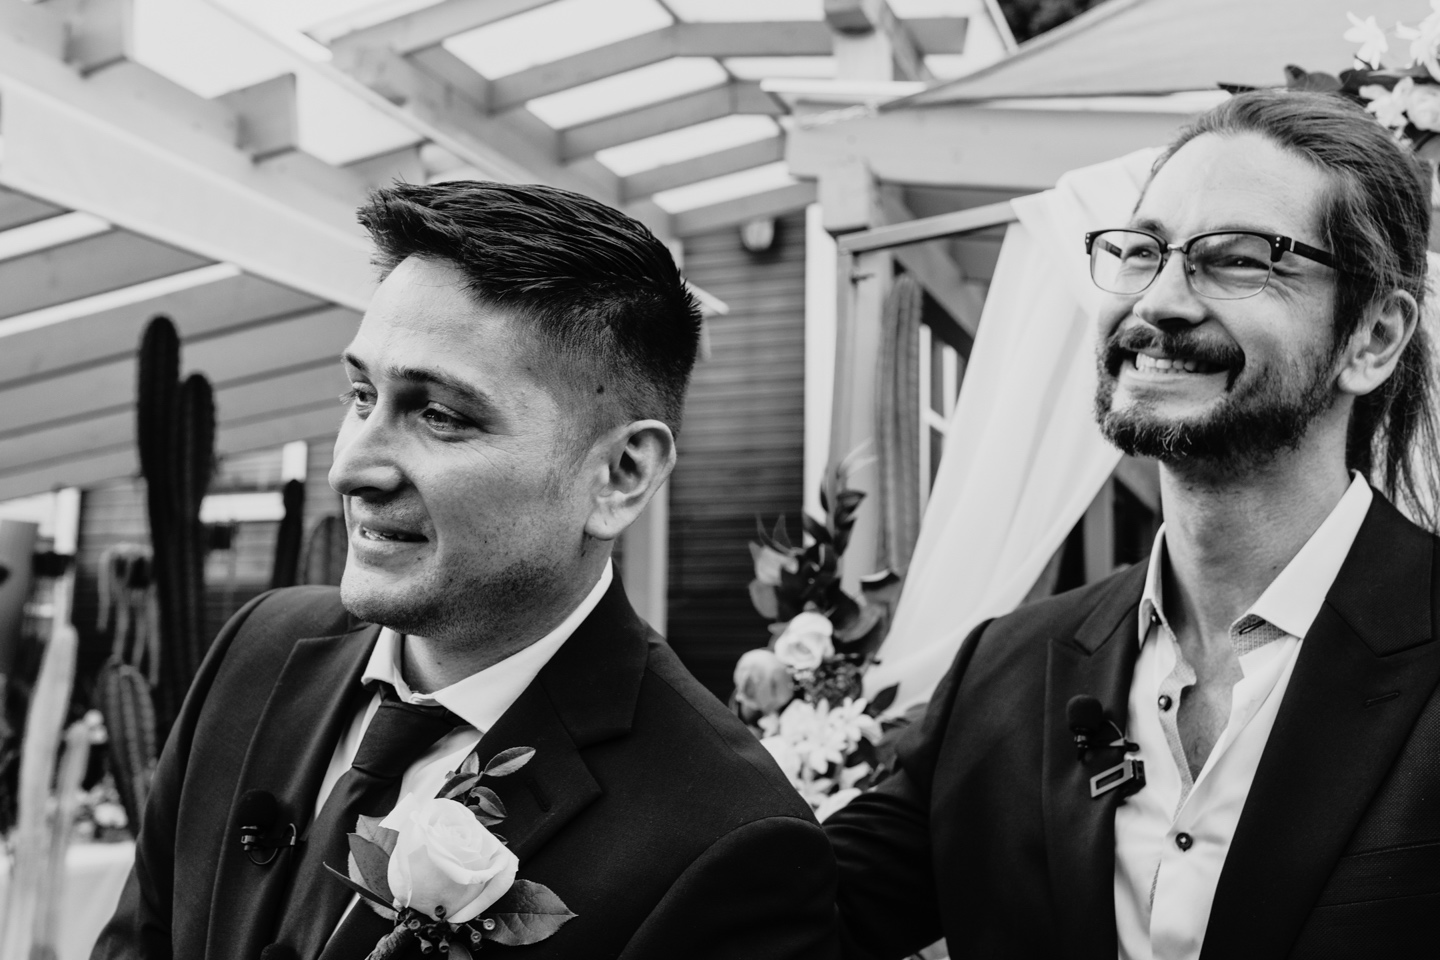 Officiant and groom smile as they watch the bride walk down the aisle.